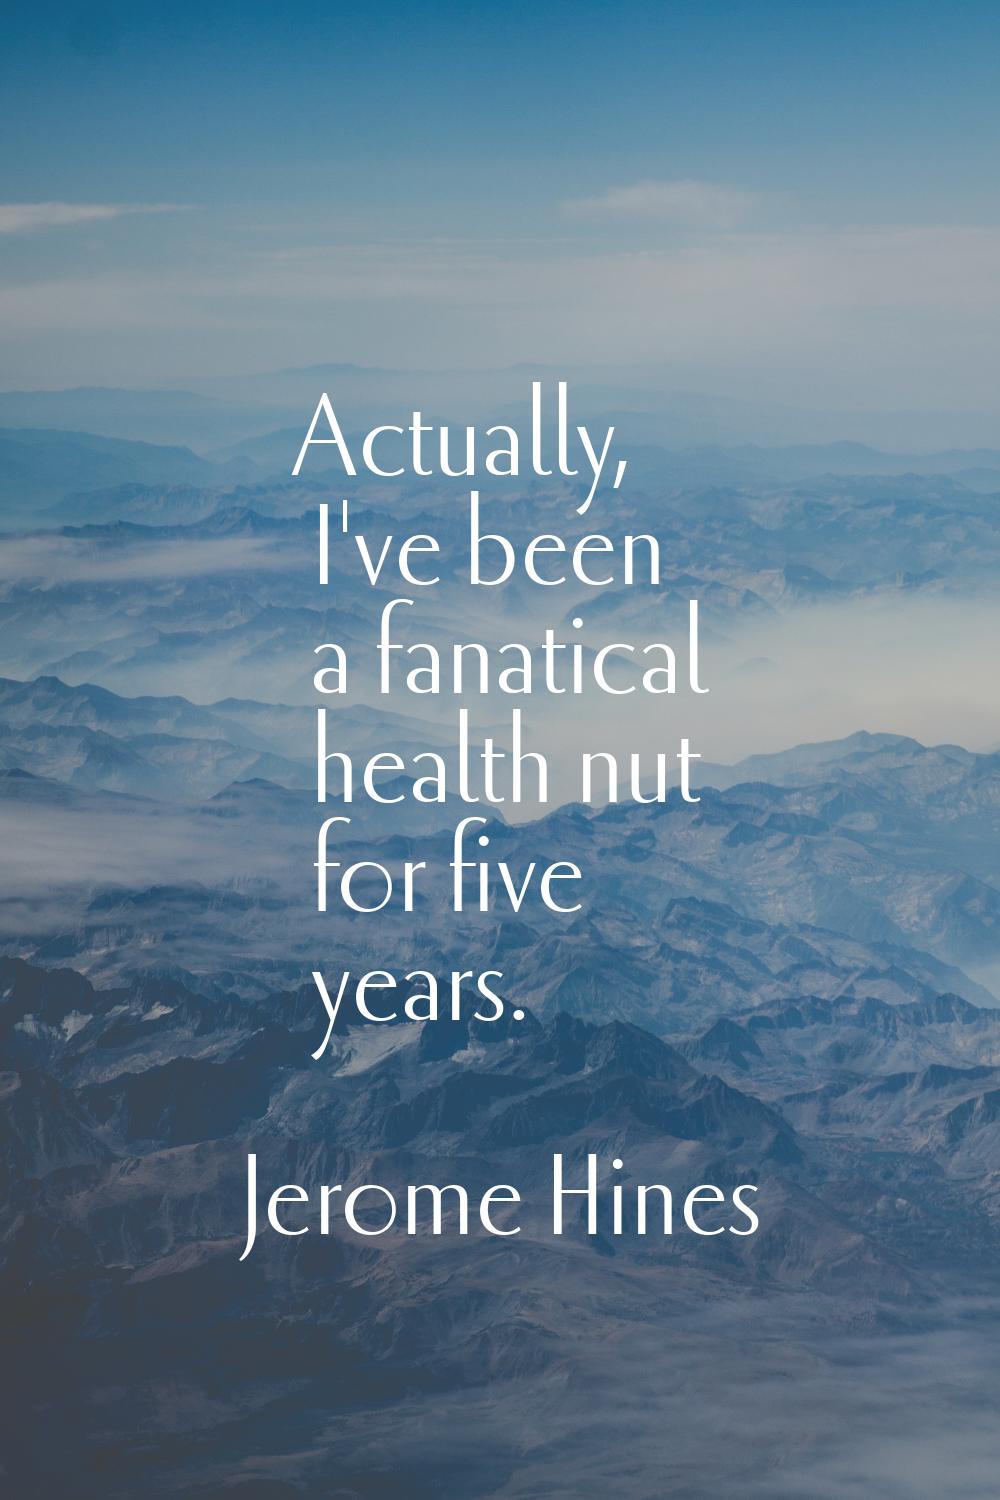 Actually, I've been a fanatical health nut for five years.